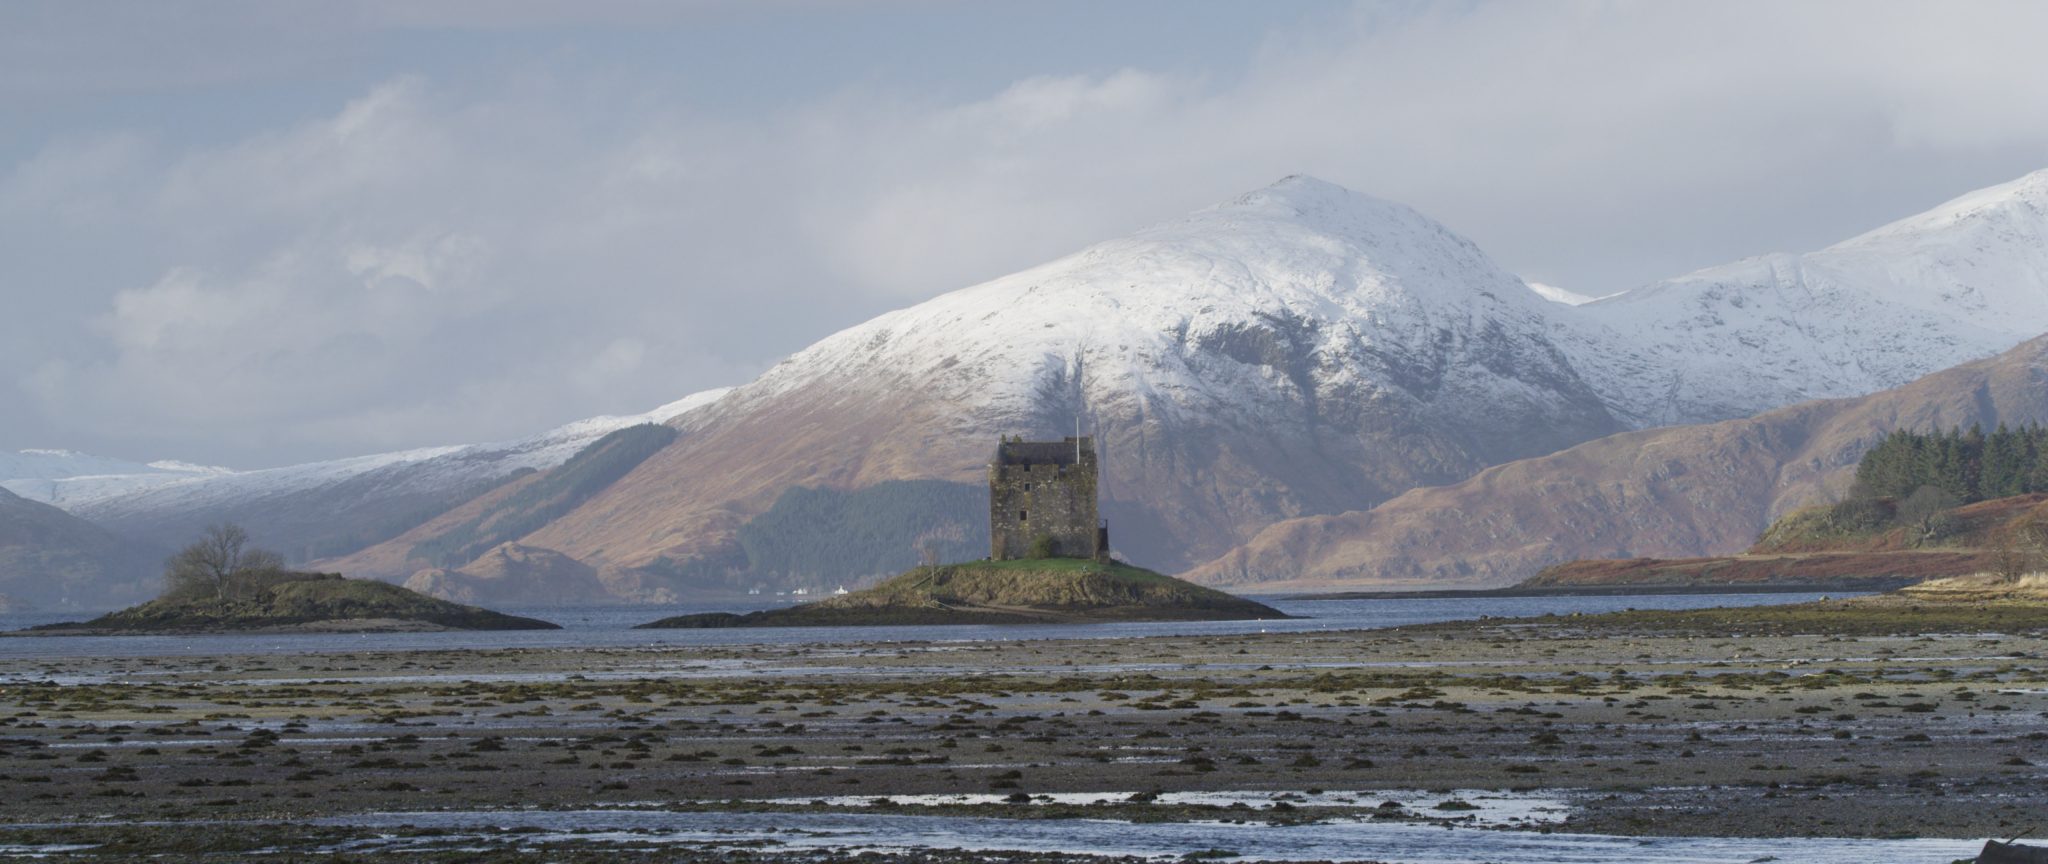 Castle Stalker and the snow clad hills of Mull, Scotland.